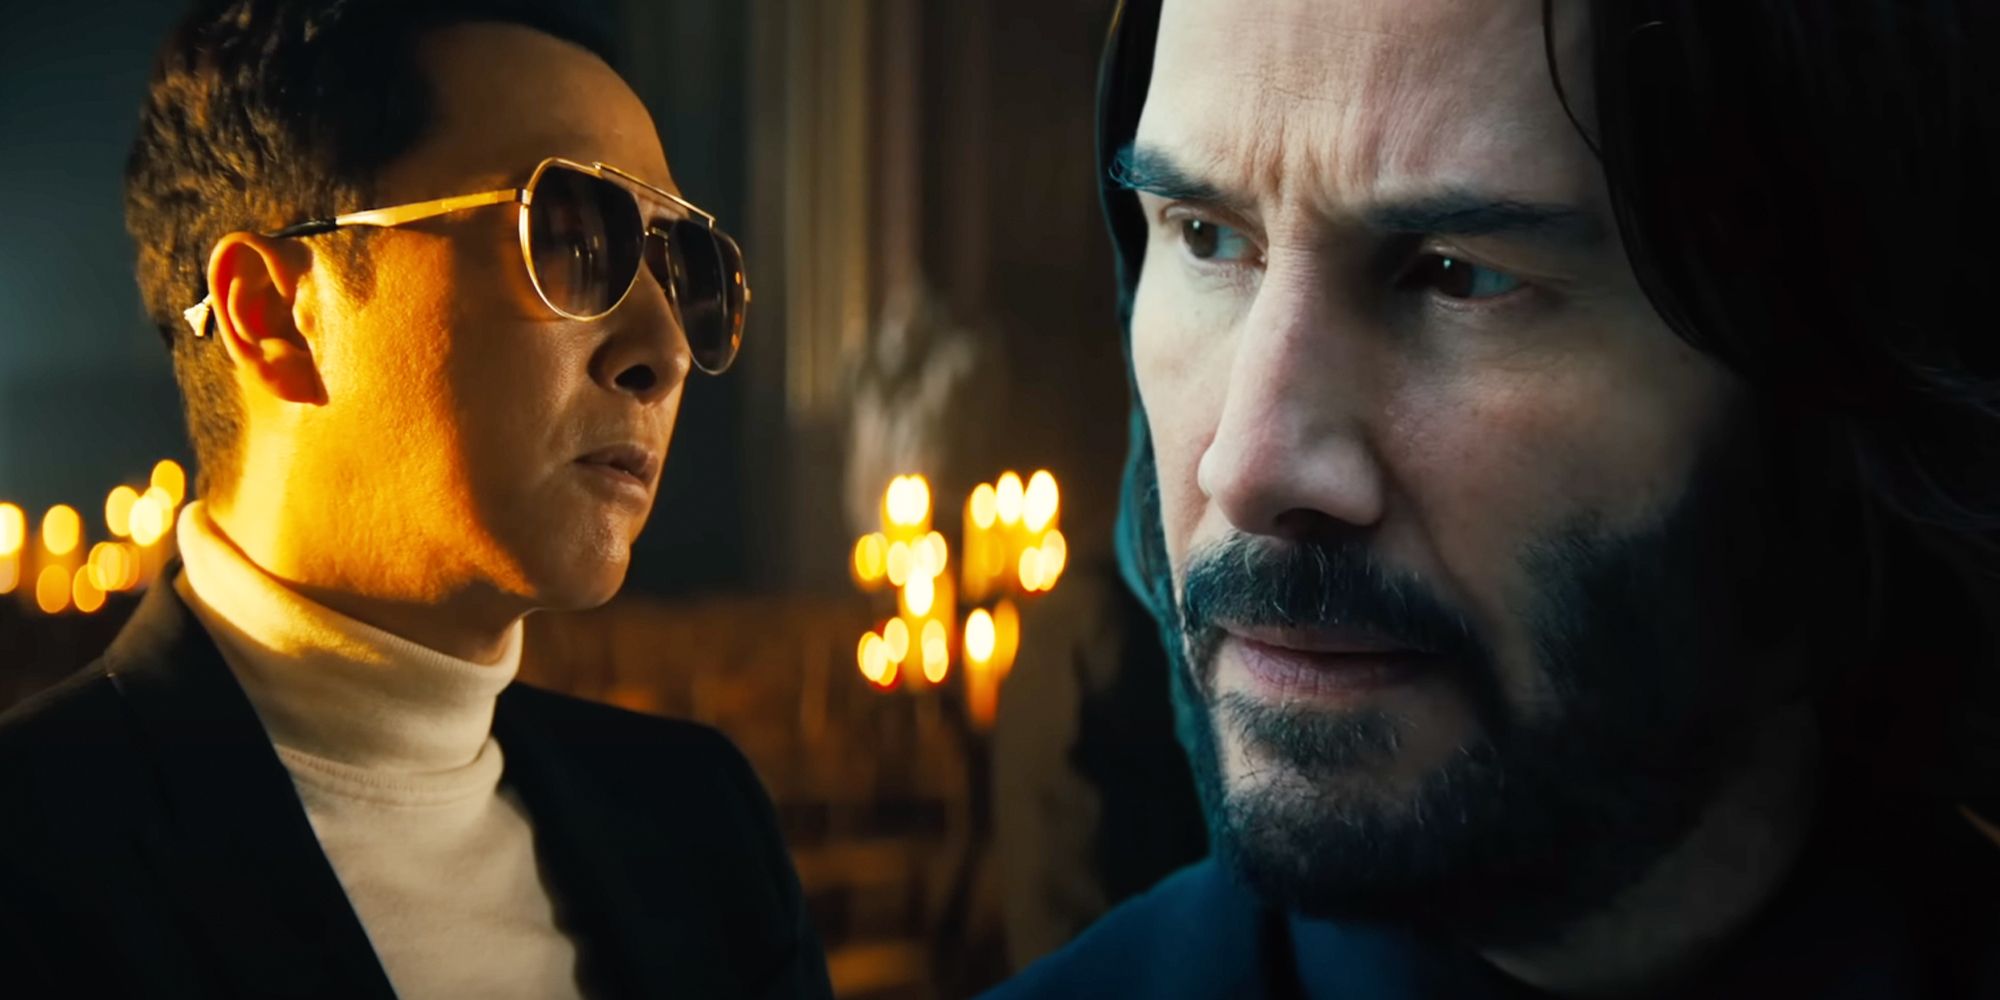 Donnie Yen's Caine  in front of candles and Keanu Reeves John Wick John Wick Chapter 4